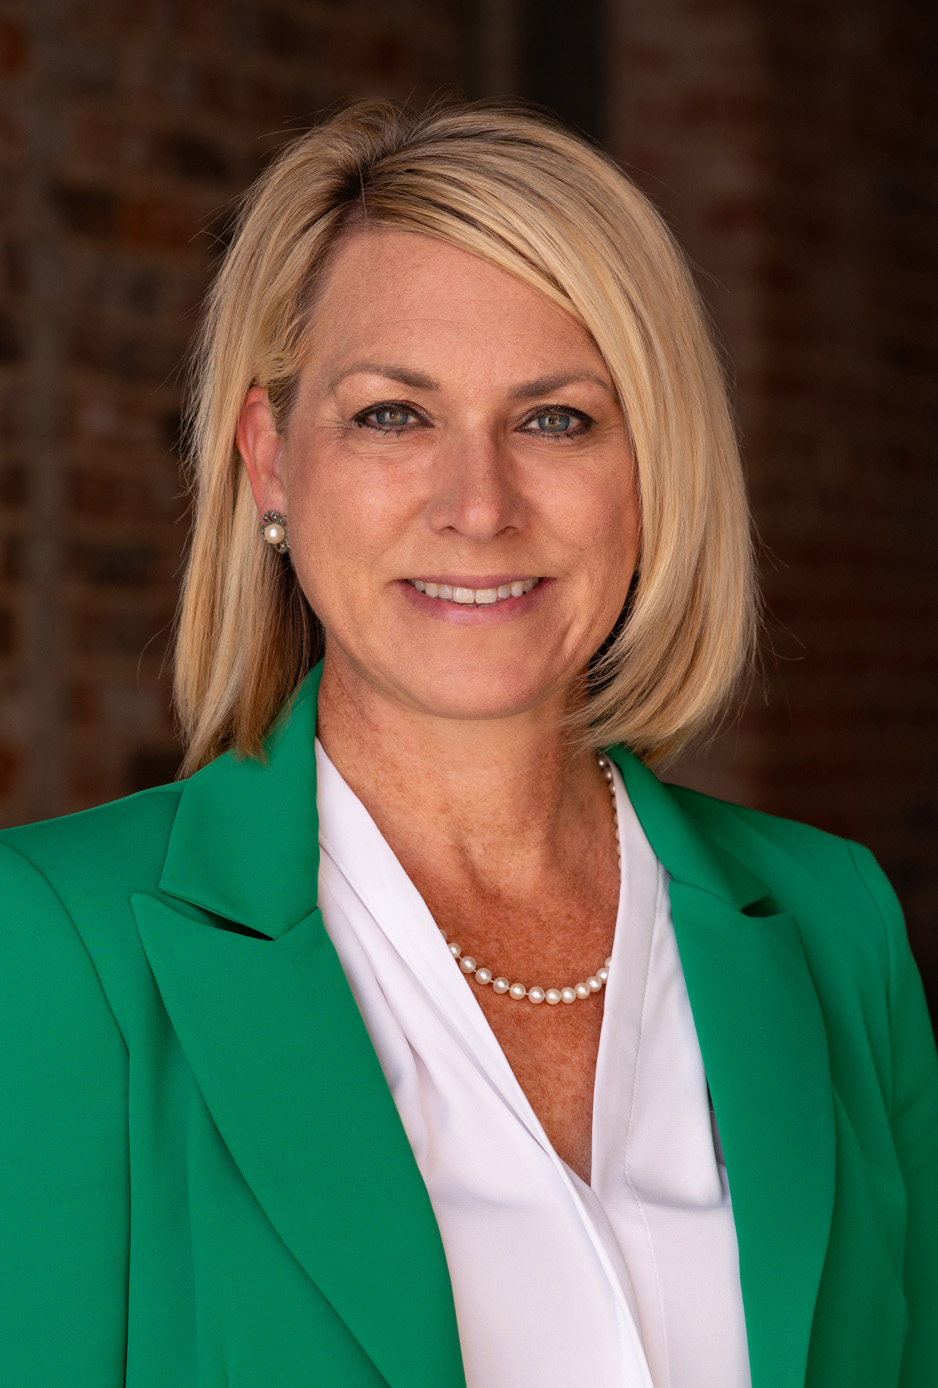 Photo of Susan M. Hess, Attorney and Shareholder at Hammer Law Offices in Dubuque, Iowa